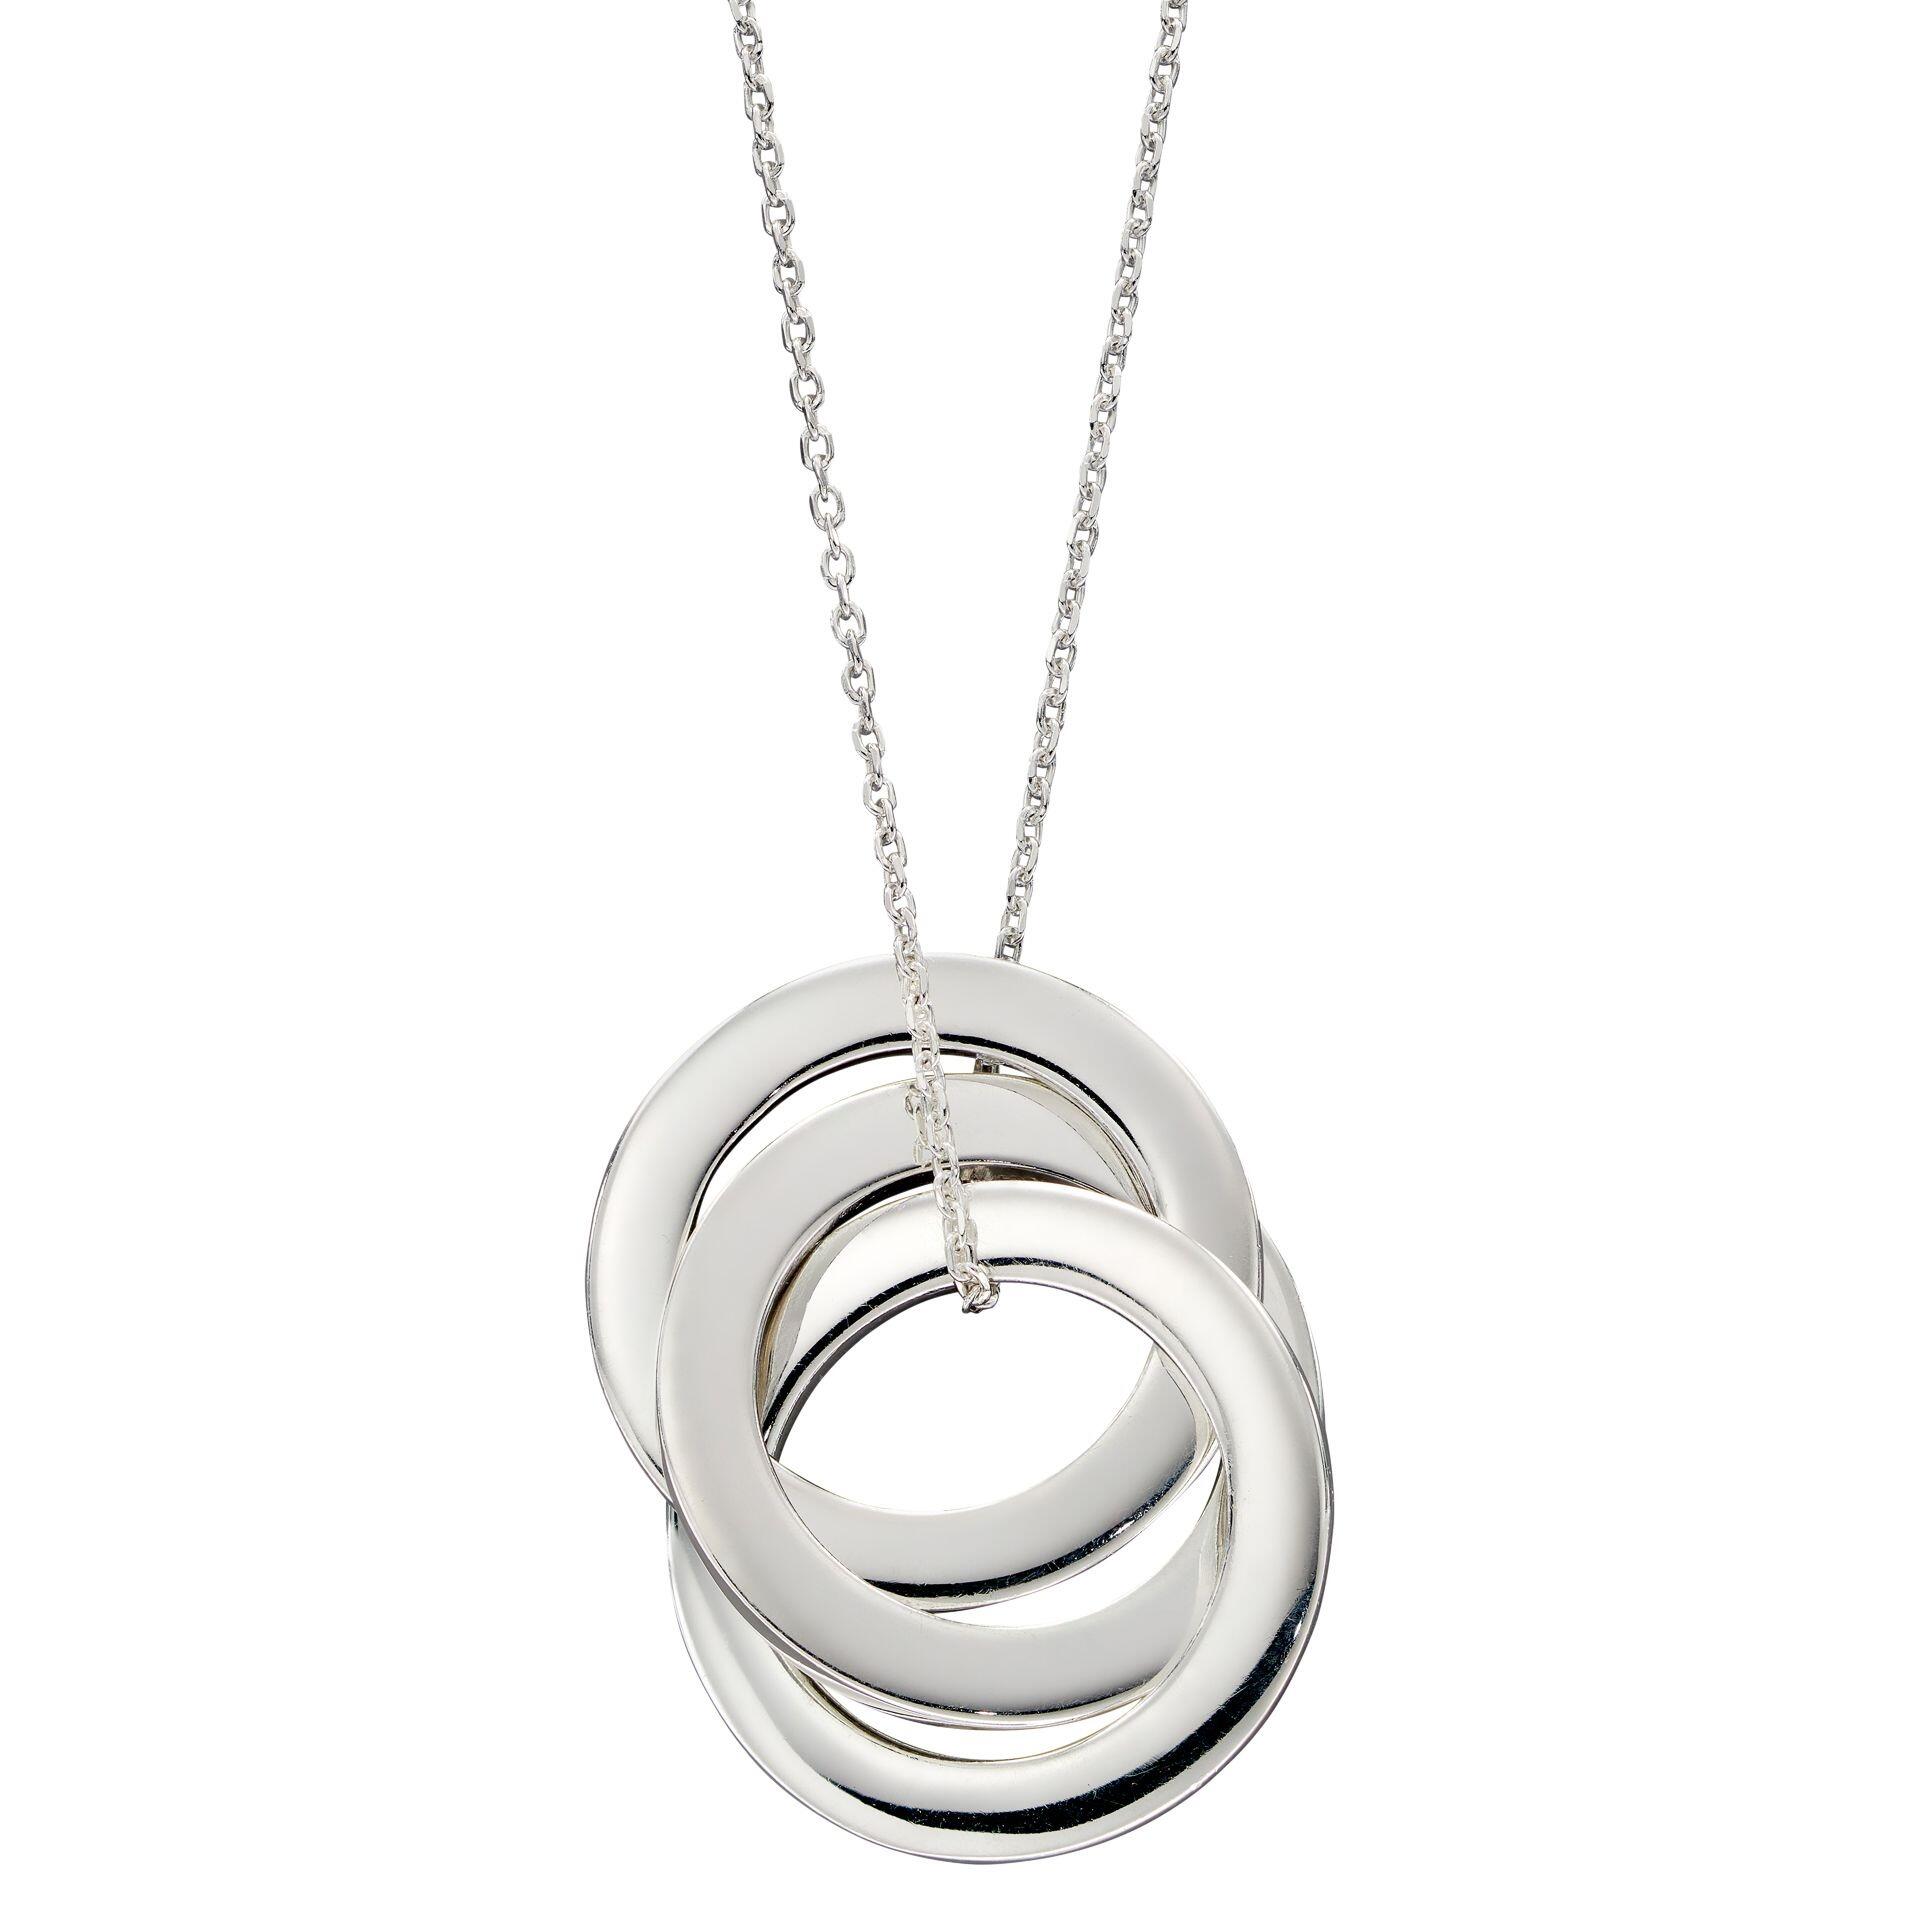 Interlinked Silver Circle Necklace - Large - Siop Wyn